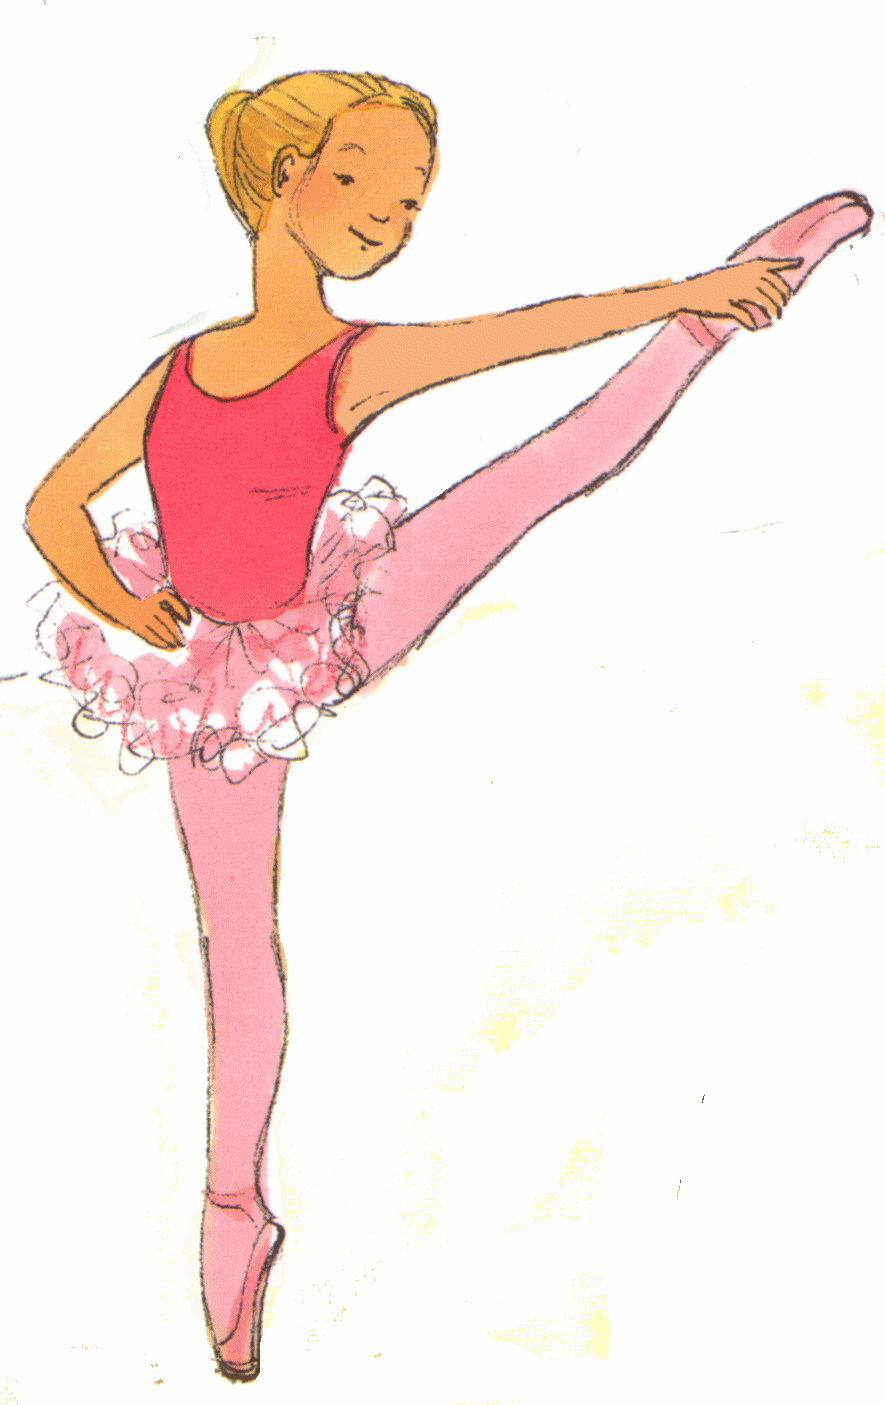 ... Clip Art Dance u0026middot; Classical Ballet Is The Most Formal Style Of Ballet Apart From This